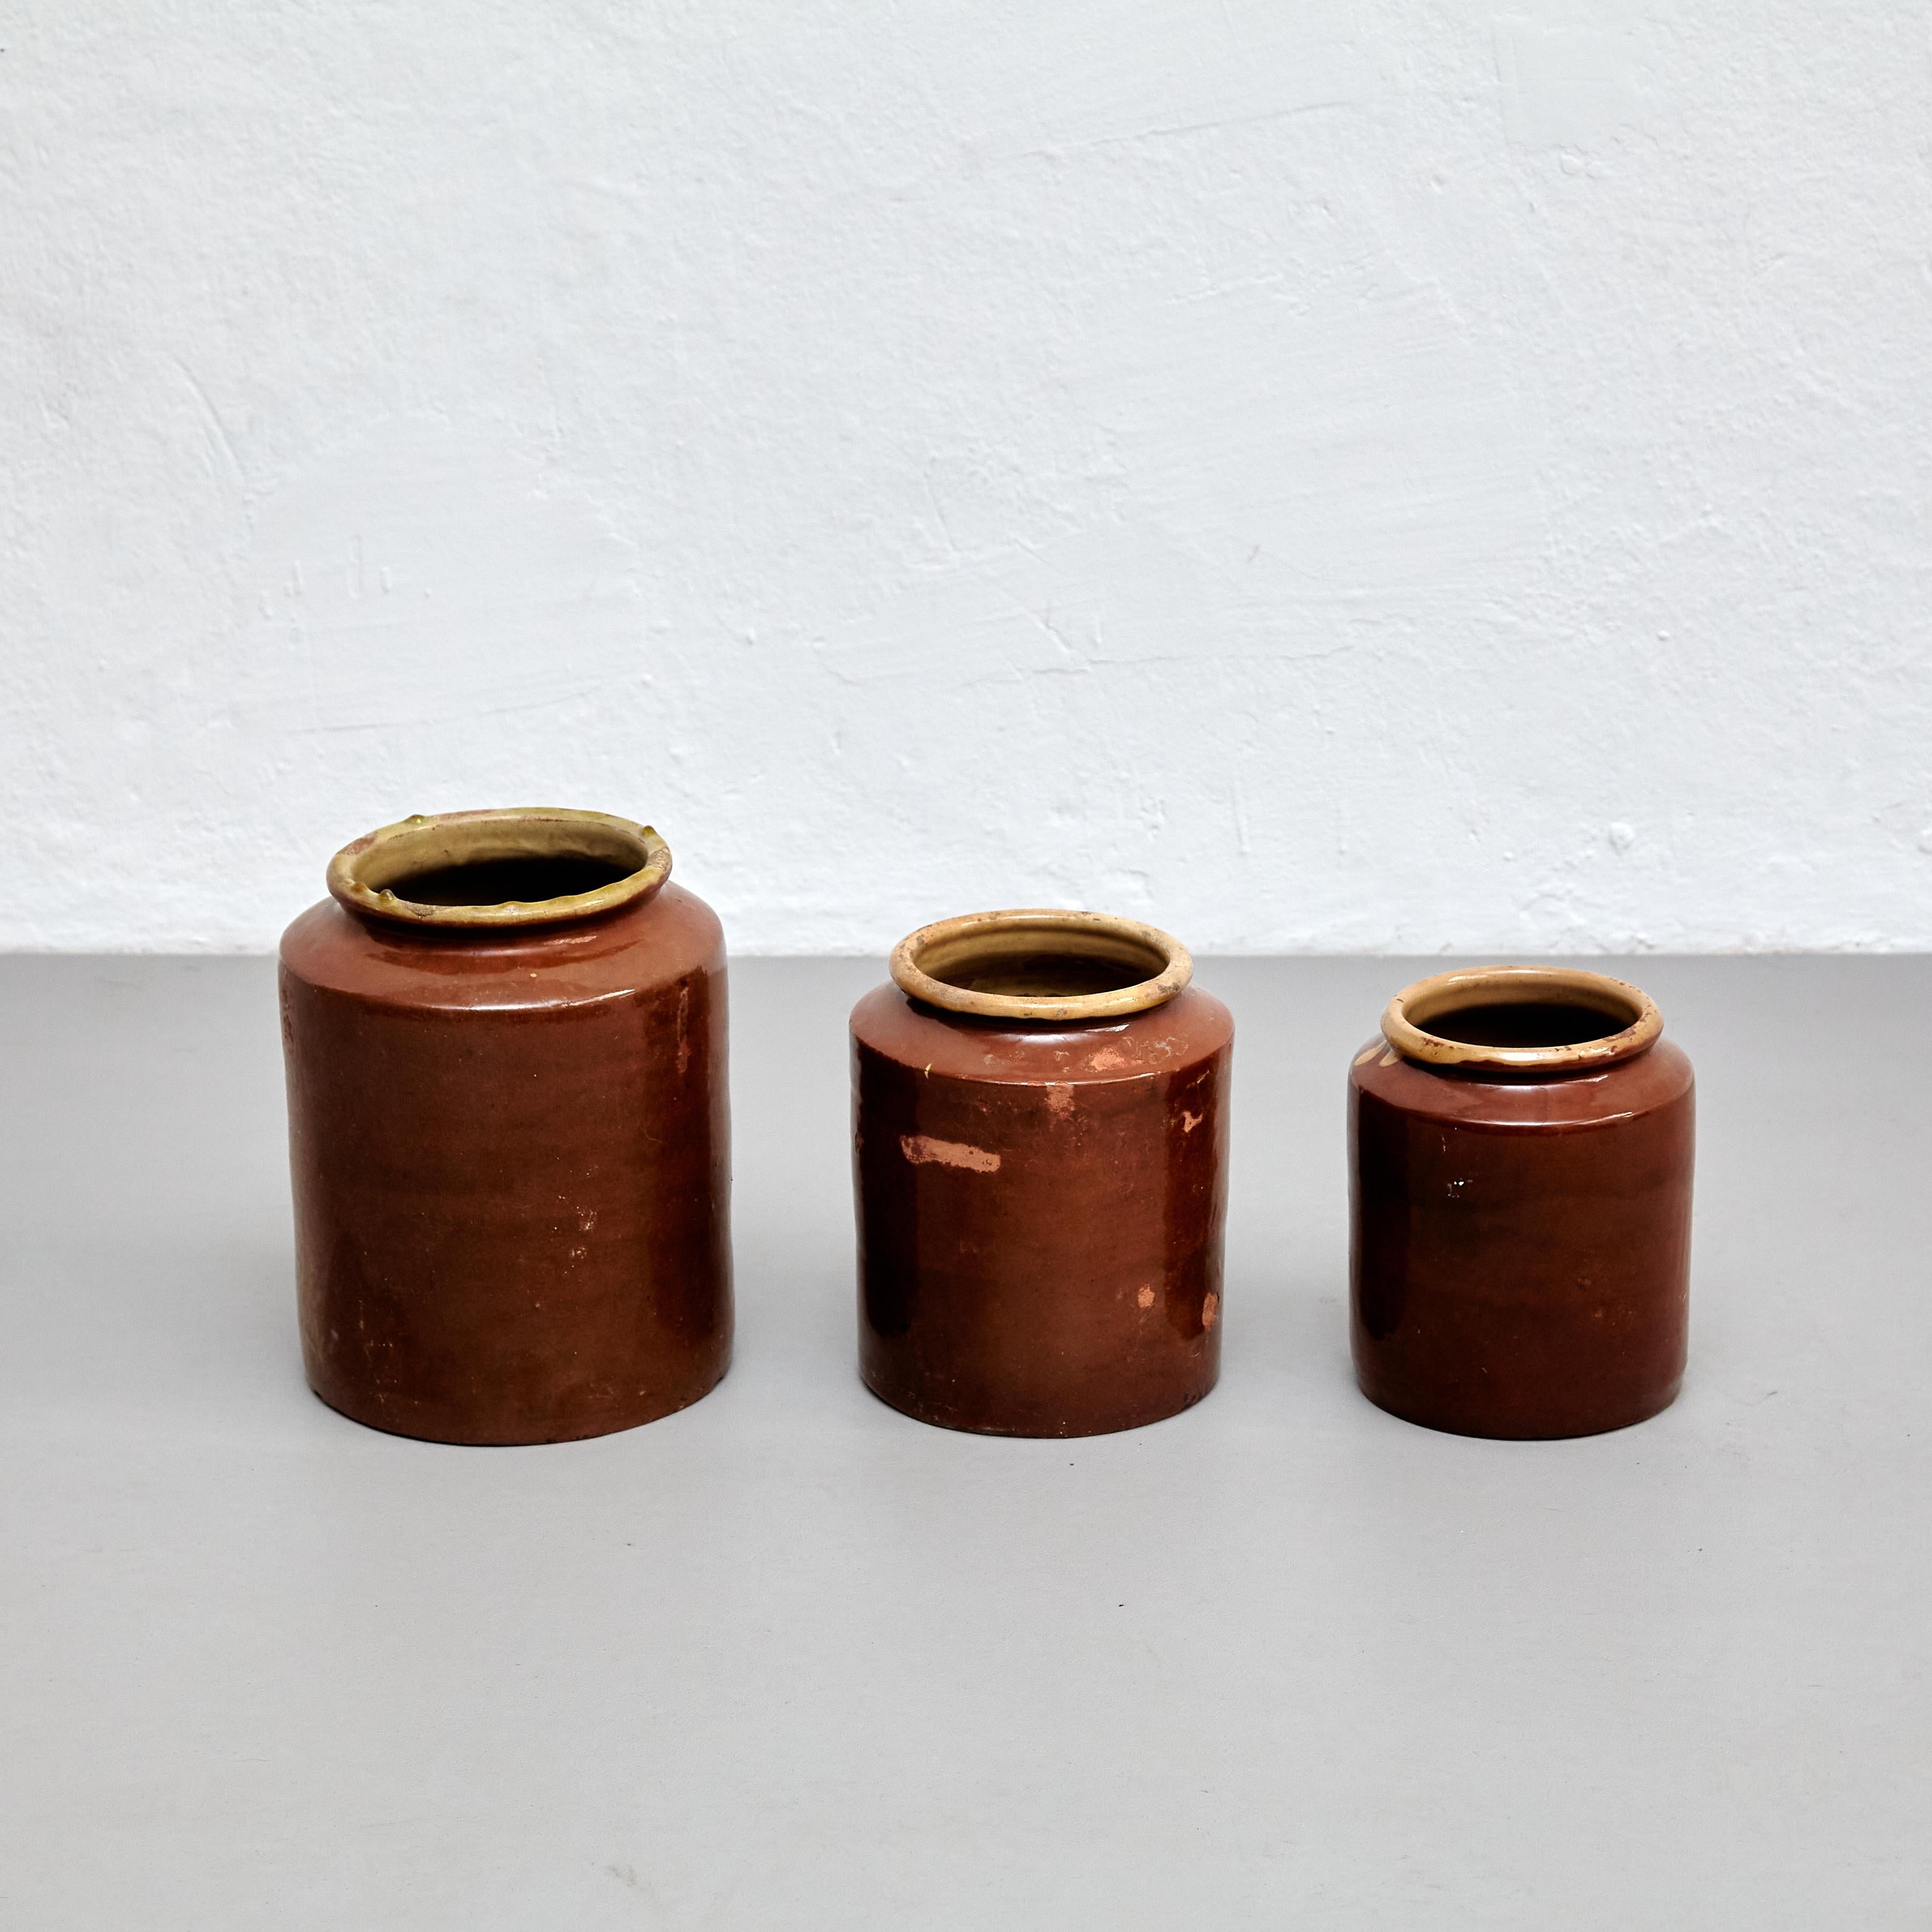 This set of three rustic ceramic vases is a beautiful example of early 20th-century Spanish craftsmanship. Each piece was carefully handmade and features a unique, organic shape that highlights the natural beauty of the ceramic material.